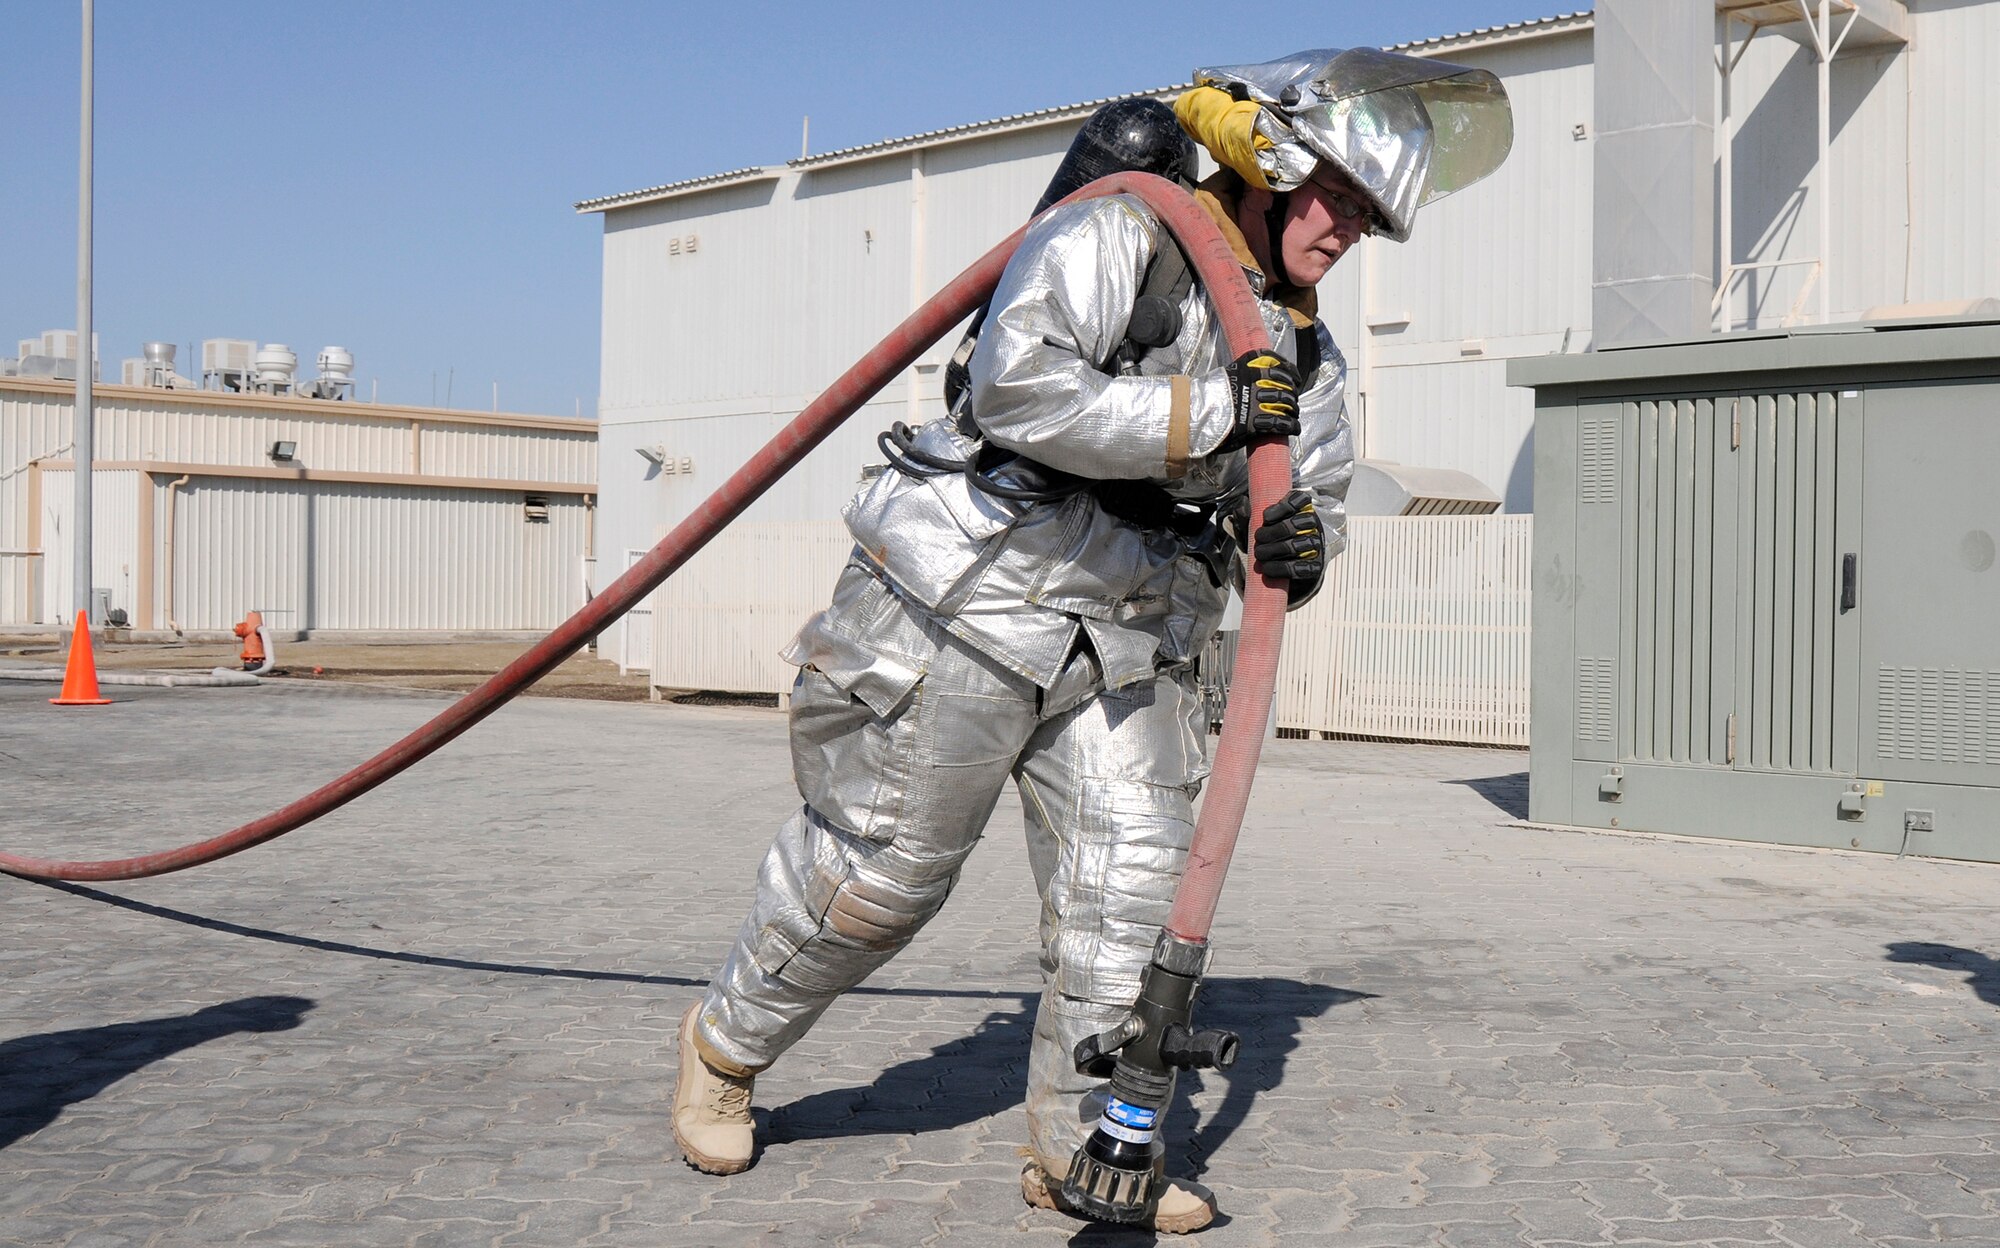 SOUTHWEST ASIA -- Second Lieutenant Sarah Rothlisberg from the 380th Expeditionary Security Forces Squadron drags a water-pressurized hose over 100 feet during the 380th Firefighter Challenge held Dec. 20 here. The Firefighter Challenge gave Airmen the opportunity to don firefighter gear and be timed while performing various physical tasks. (U.S. Air Force photo/Tech. Sgt. Christopher A. Campbell)(released).